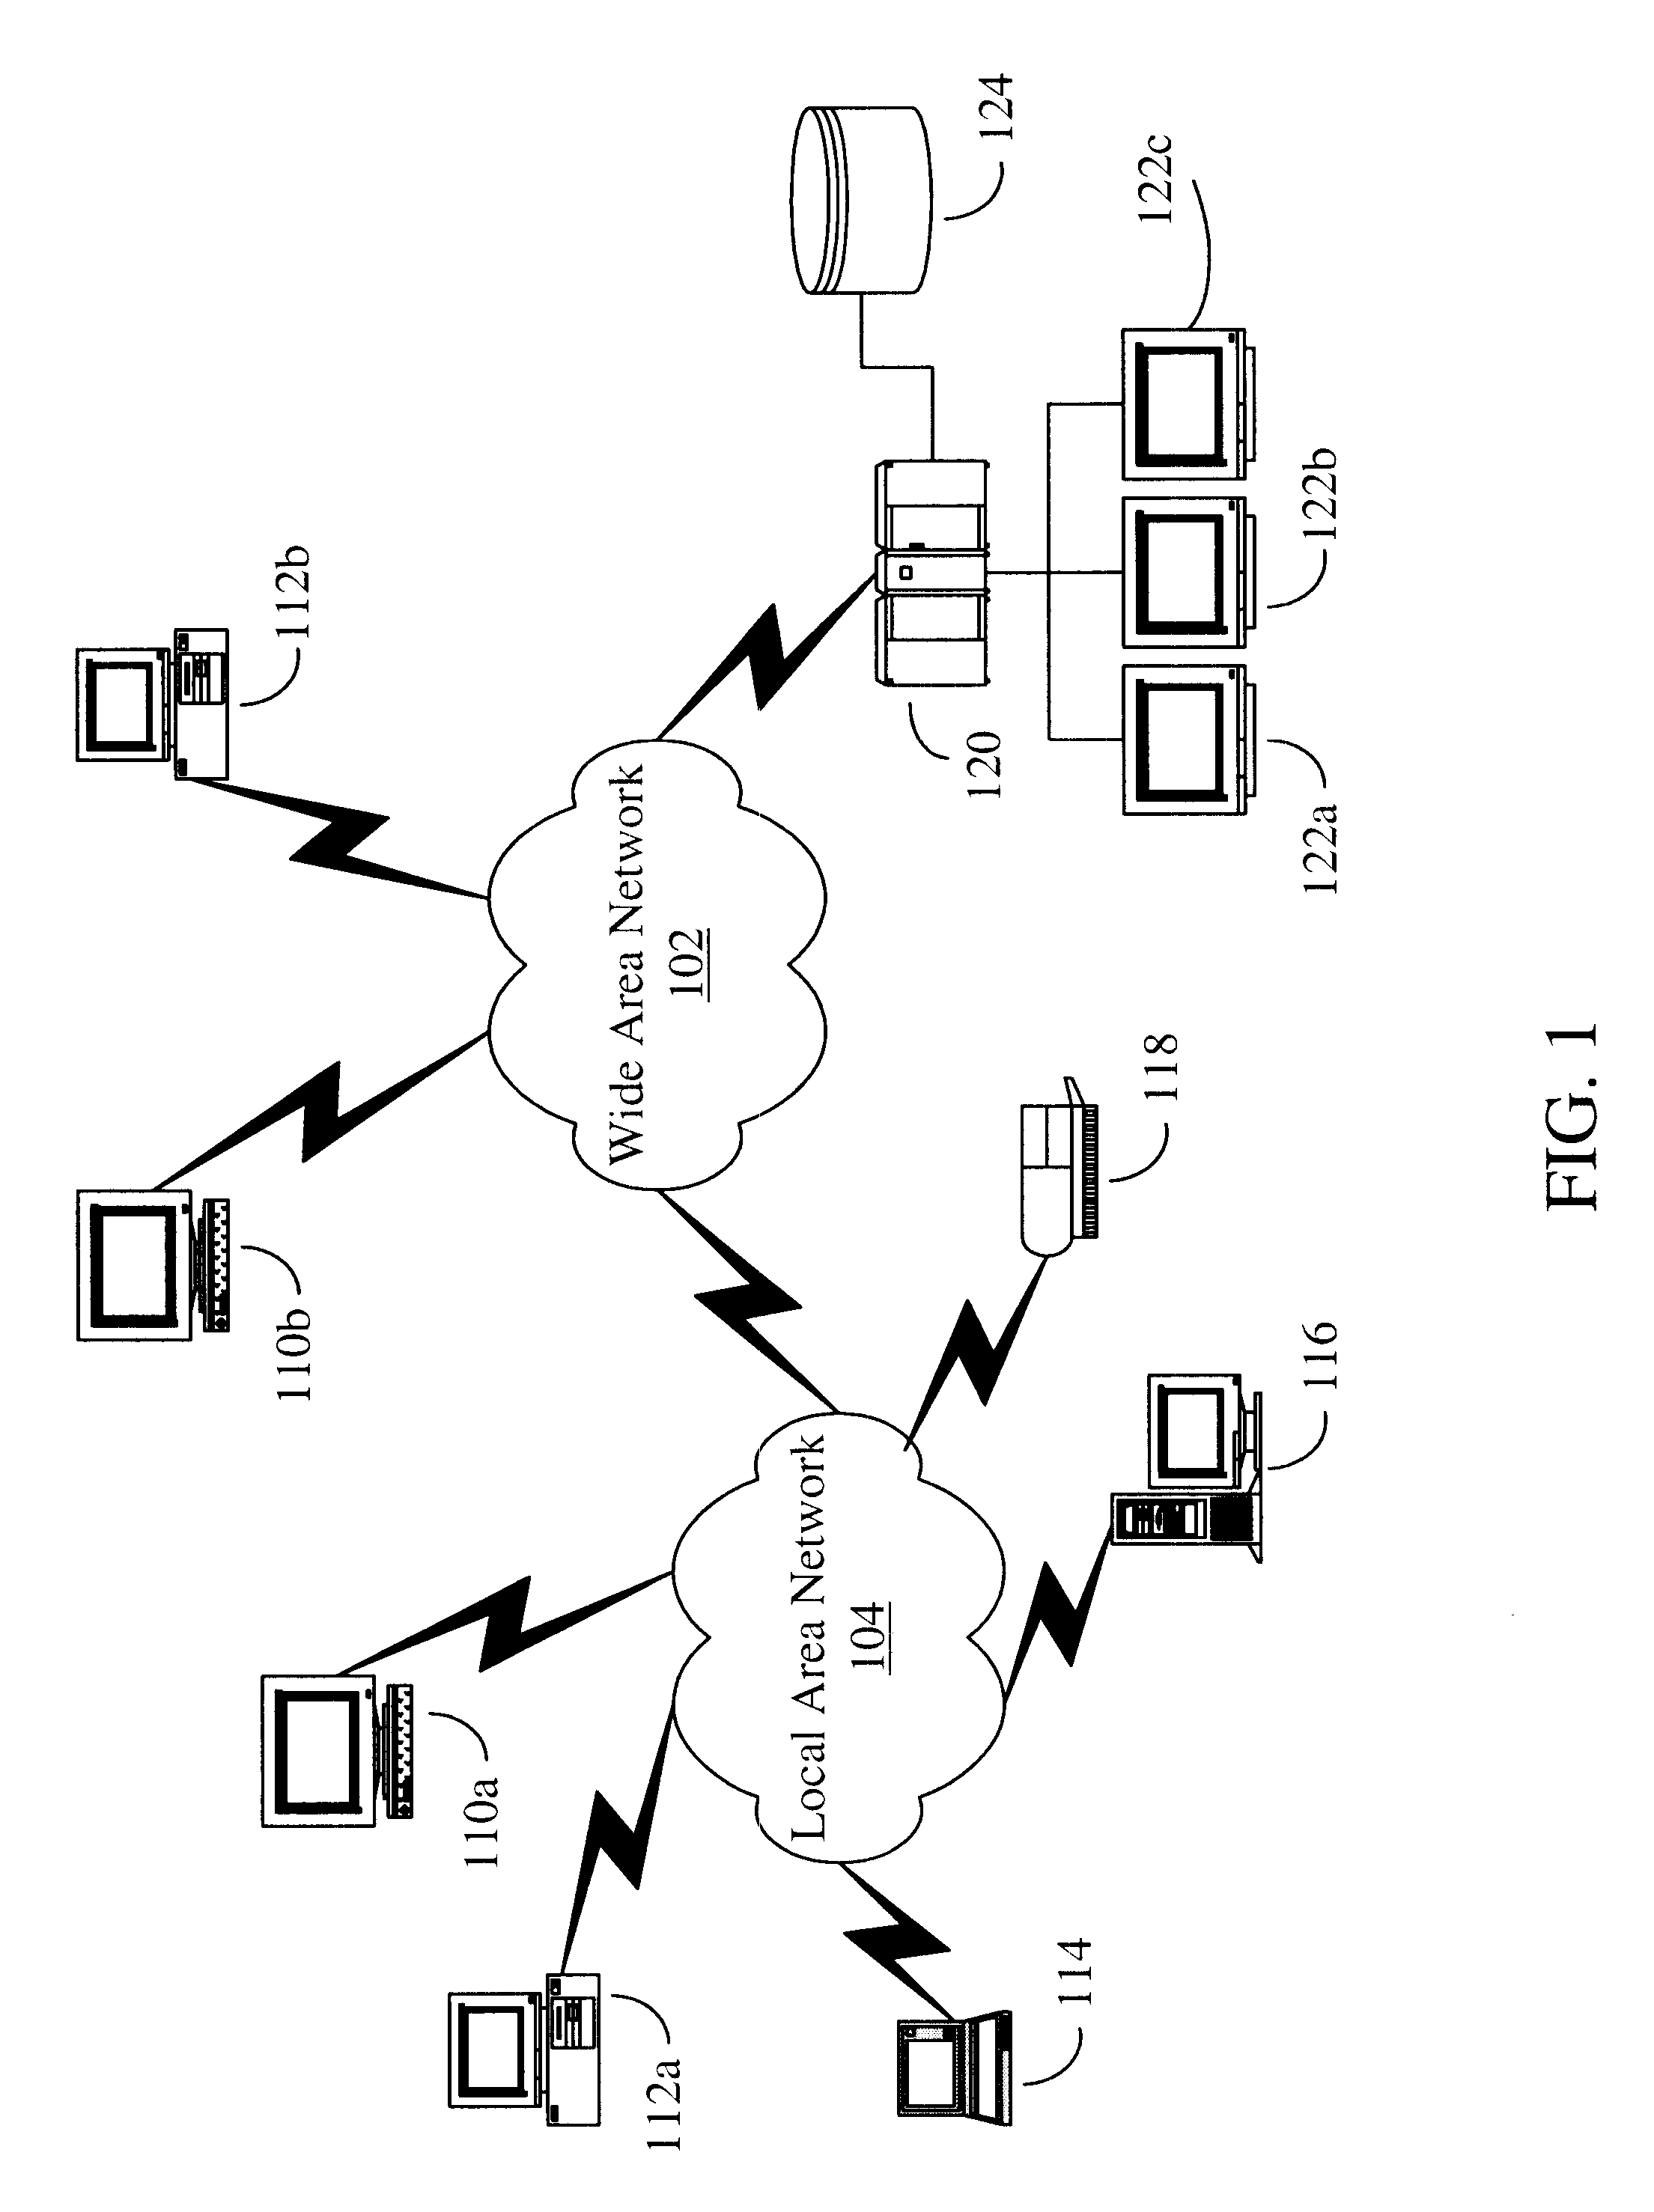 Navigation of view relationships in database system